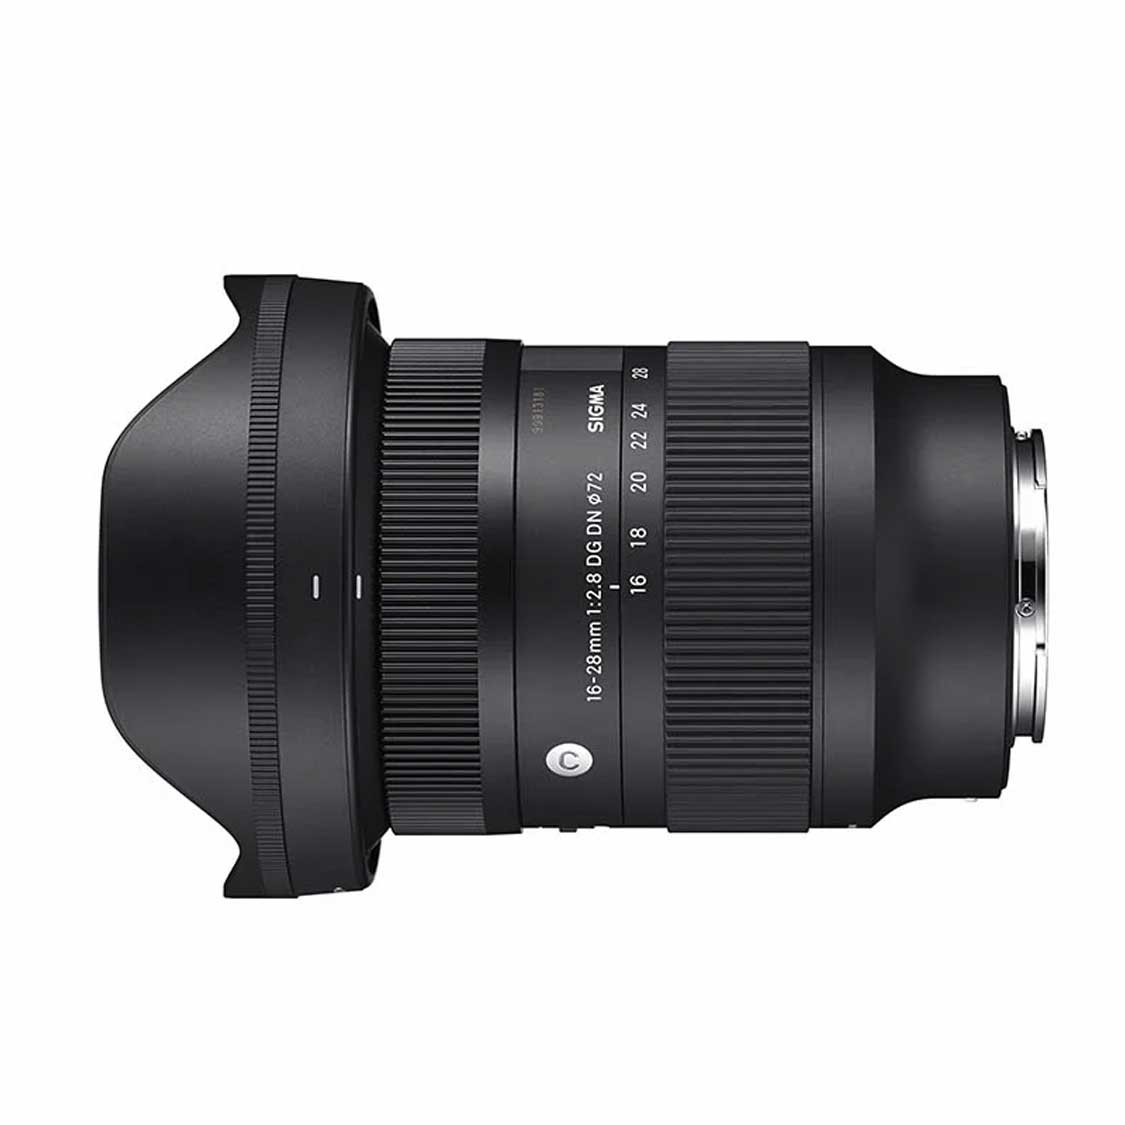  Sigma Contemporary 16-28mm f2.8 DG DN Lens for L-mount